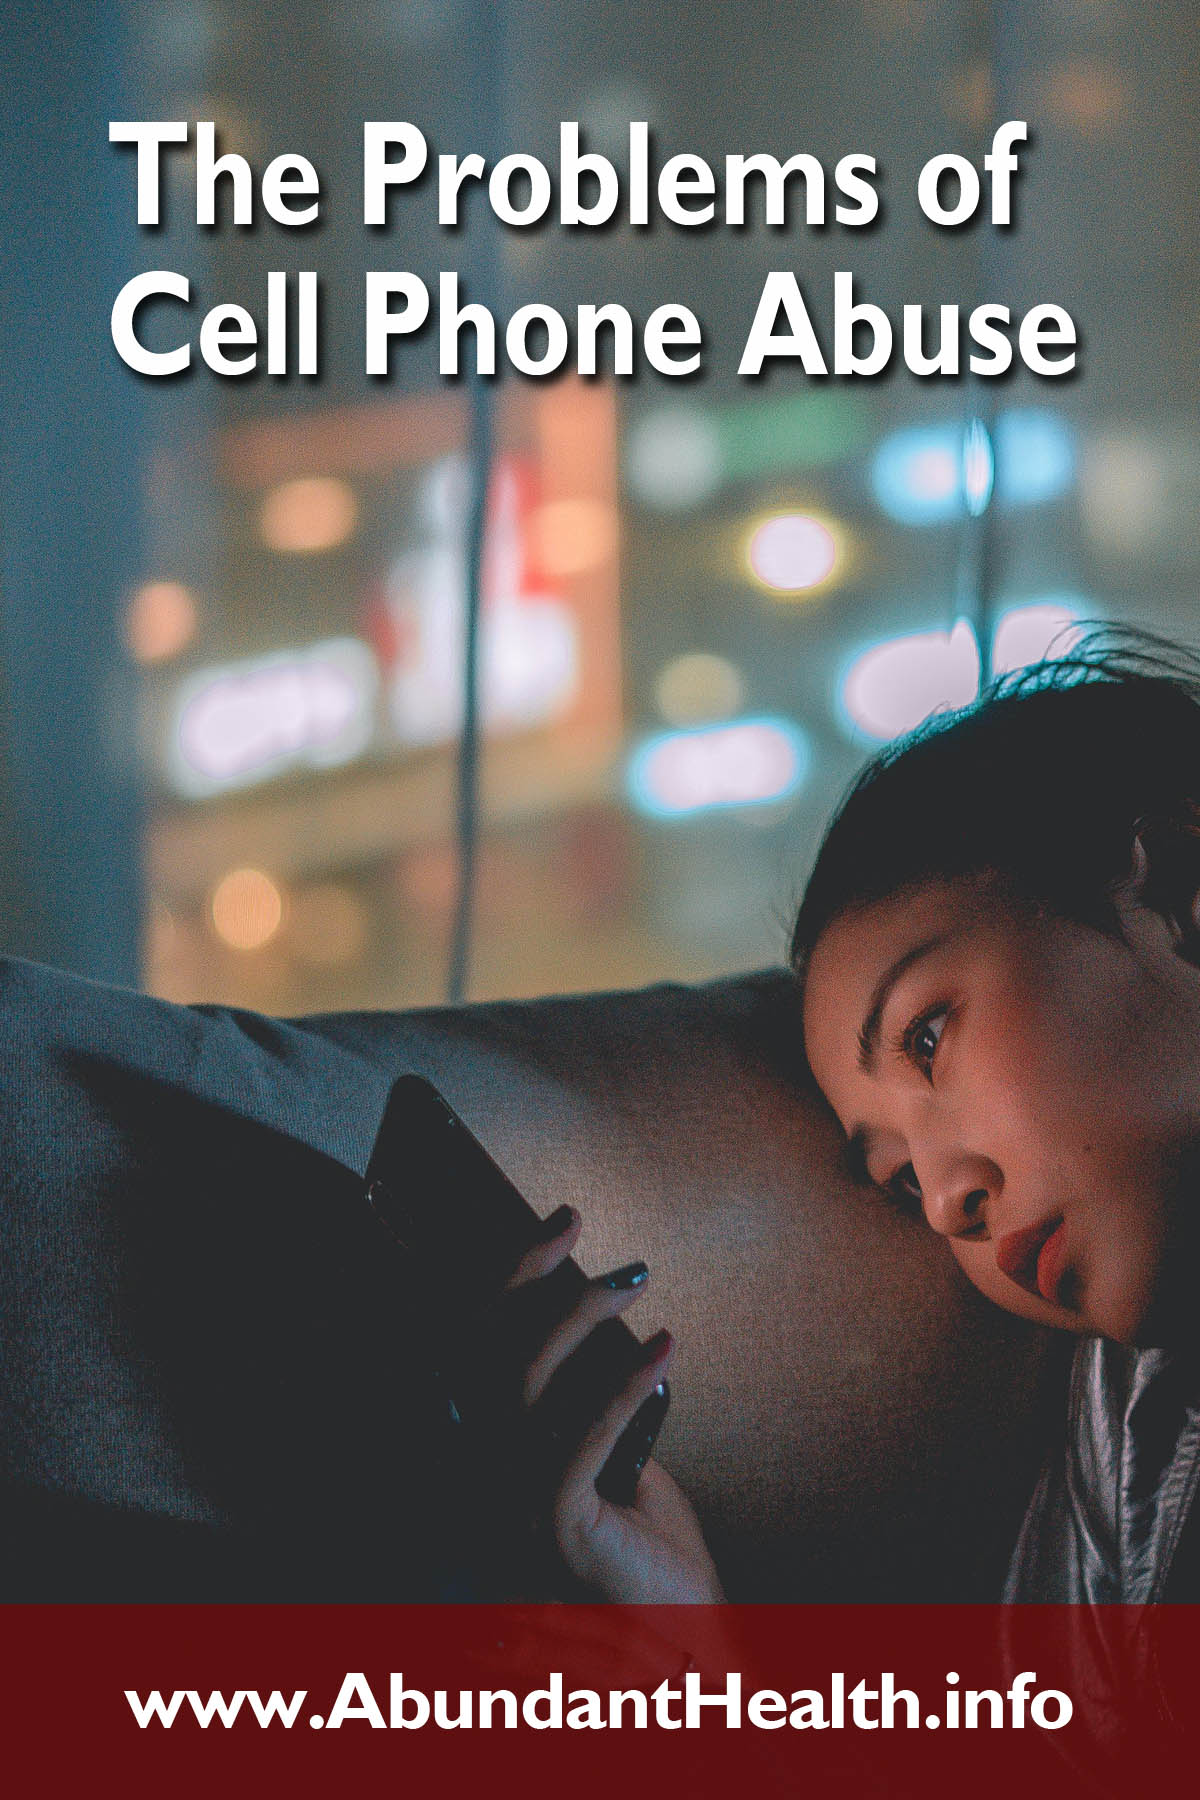 The Problems of Cell Phone Abuse